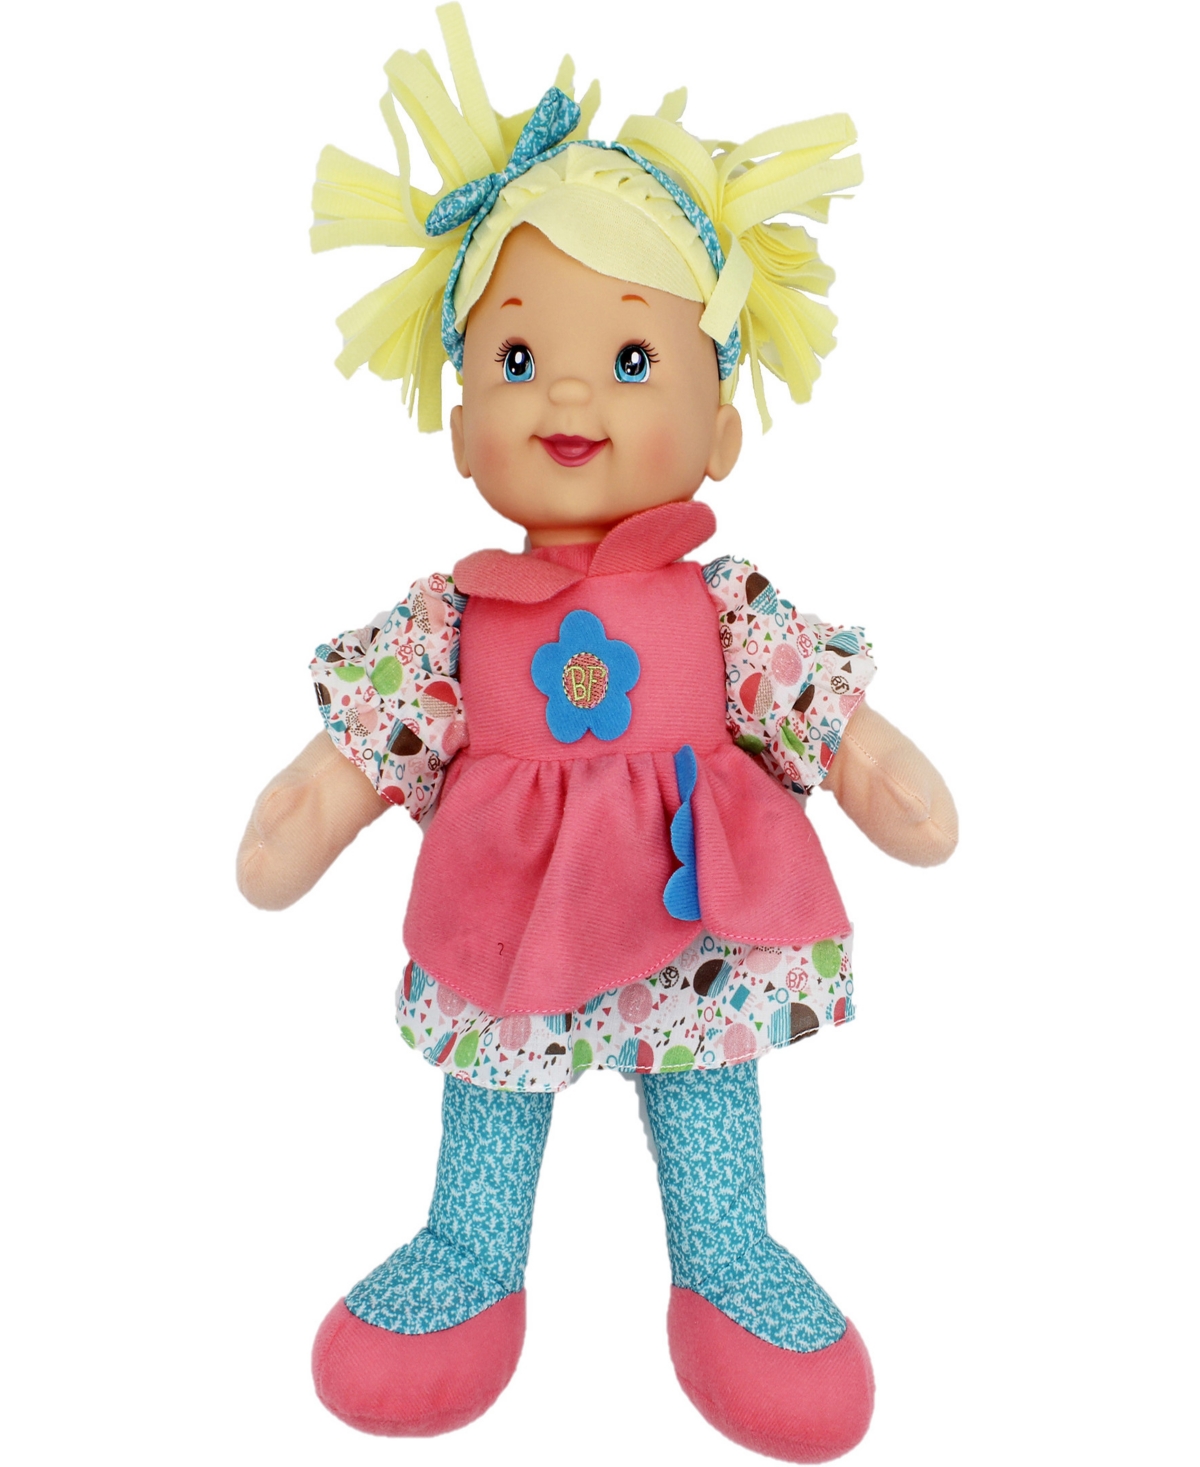 Baby's First By Nemcor Babies' Goldberger Doll 15" Little Talker Doll Blonde With Coral Dress In Multi